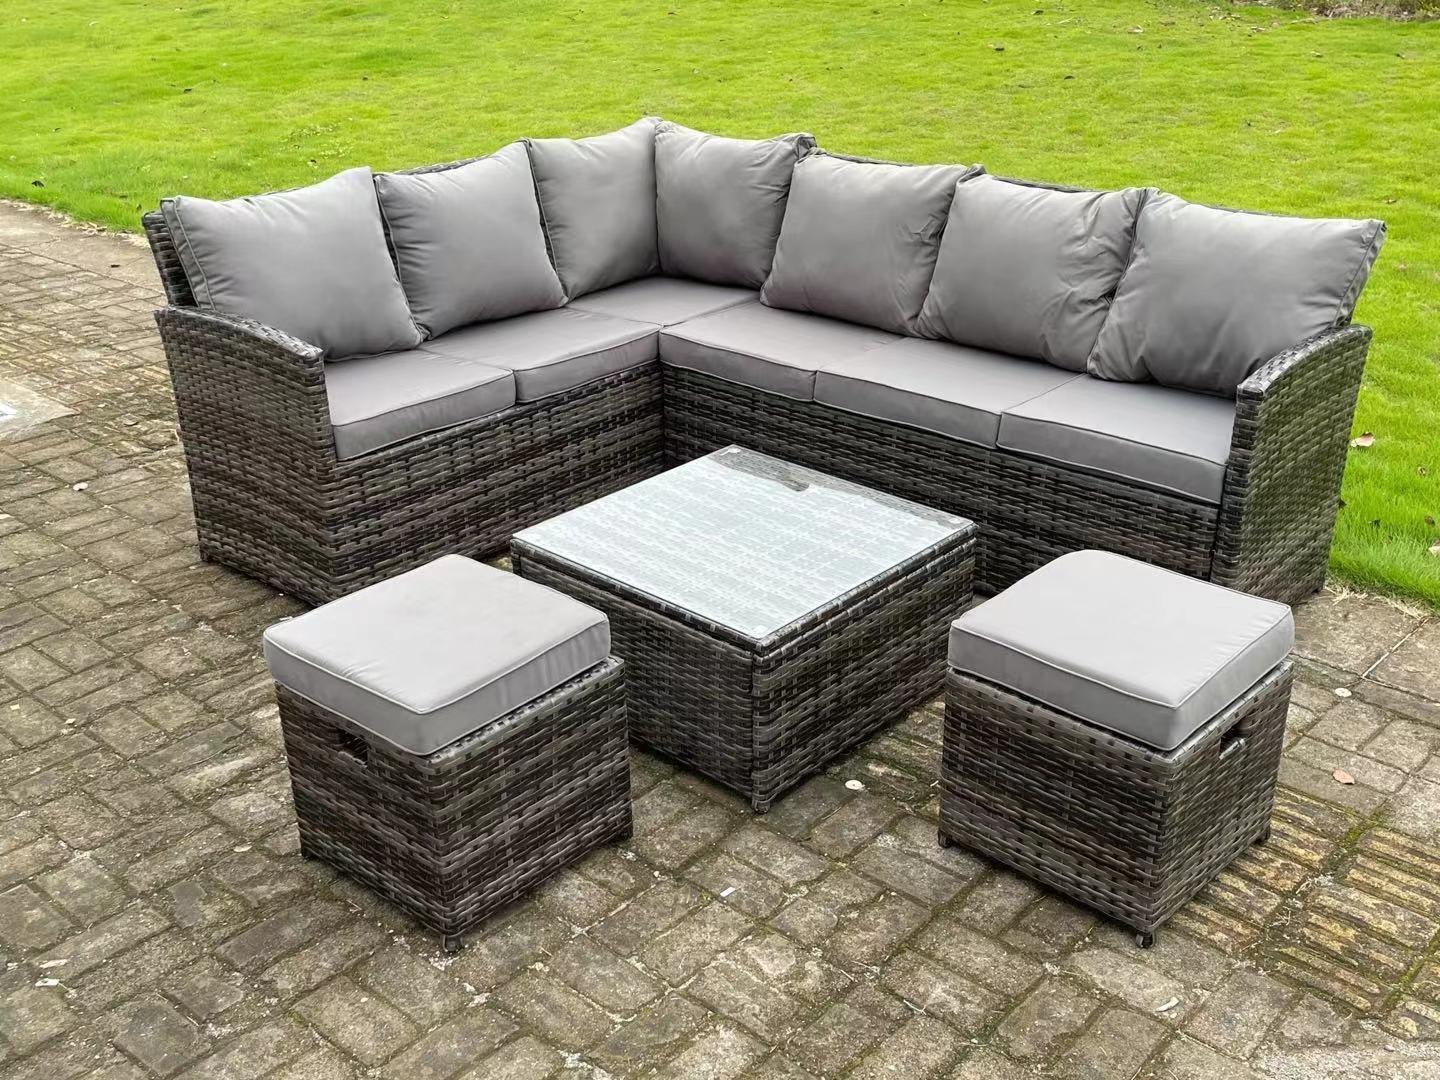 High Back Rattan Corner Sofa Set Outdoor Furniture Square Coffee Table 2 Small Footstools 8 Seater